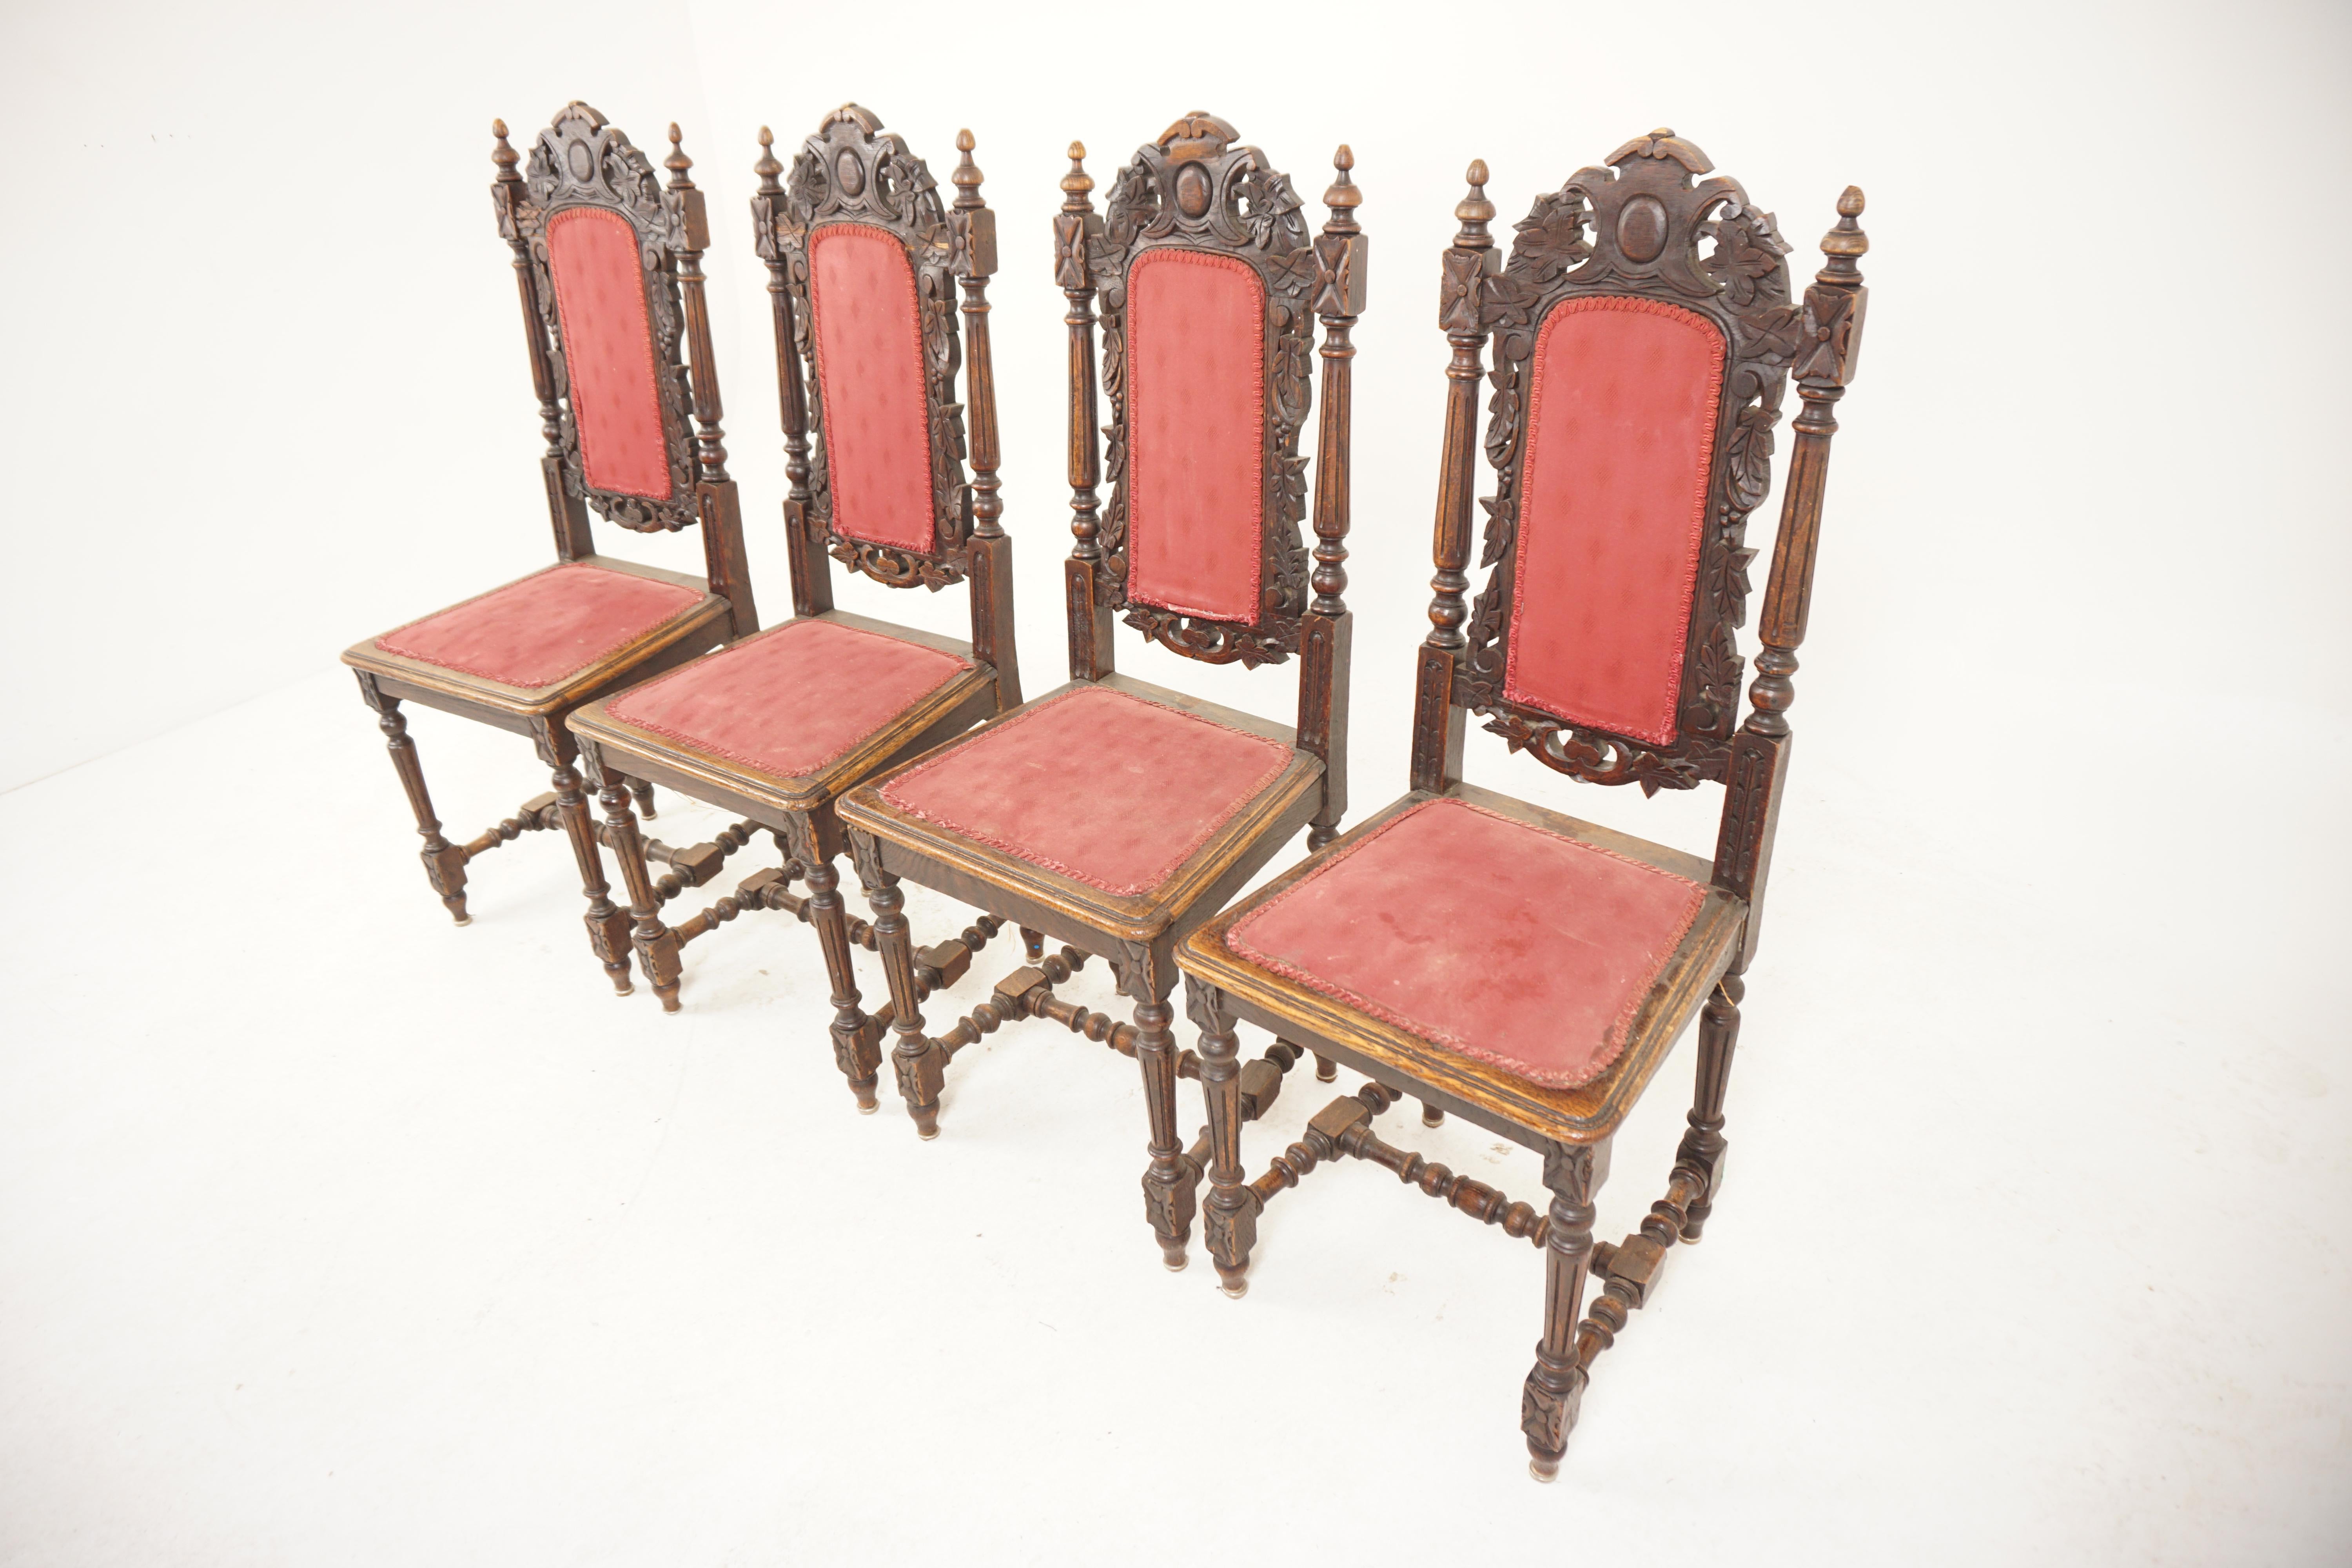 4 Victorian carved oak carolean style dining chairs, occasional chairs, Scotland 1890, H177

Scotland 1890
Solid oak
Original finish
Having ornate carved tops
Carved supports on the ends with finials on top
Upholstered back
Above an